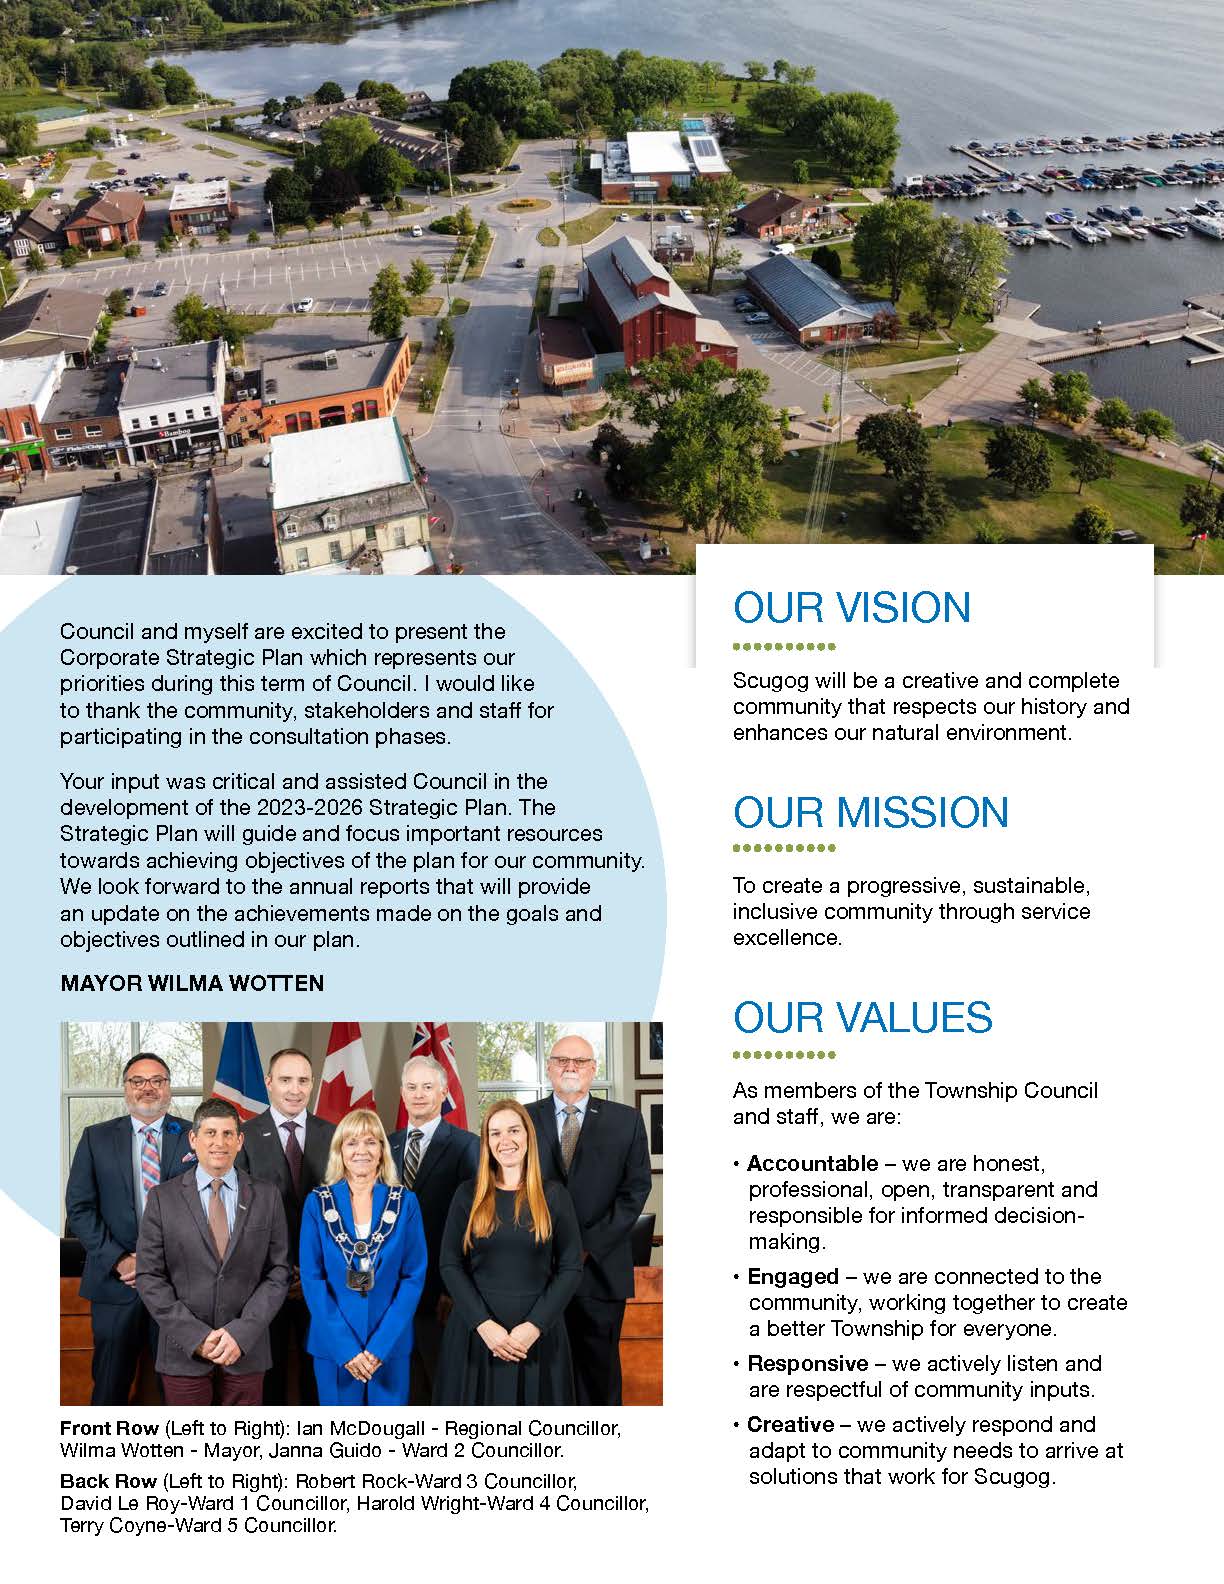 Council and waterfront images with Vision, Mission and Value statements